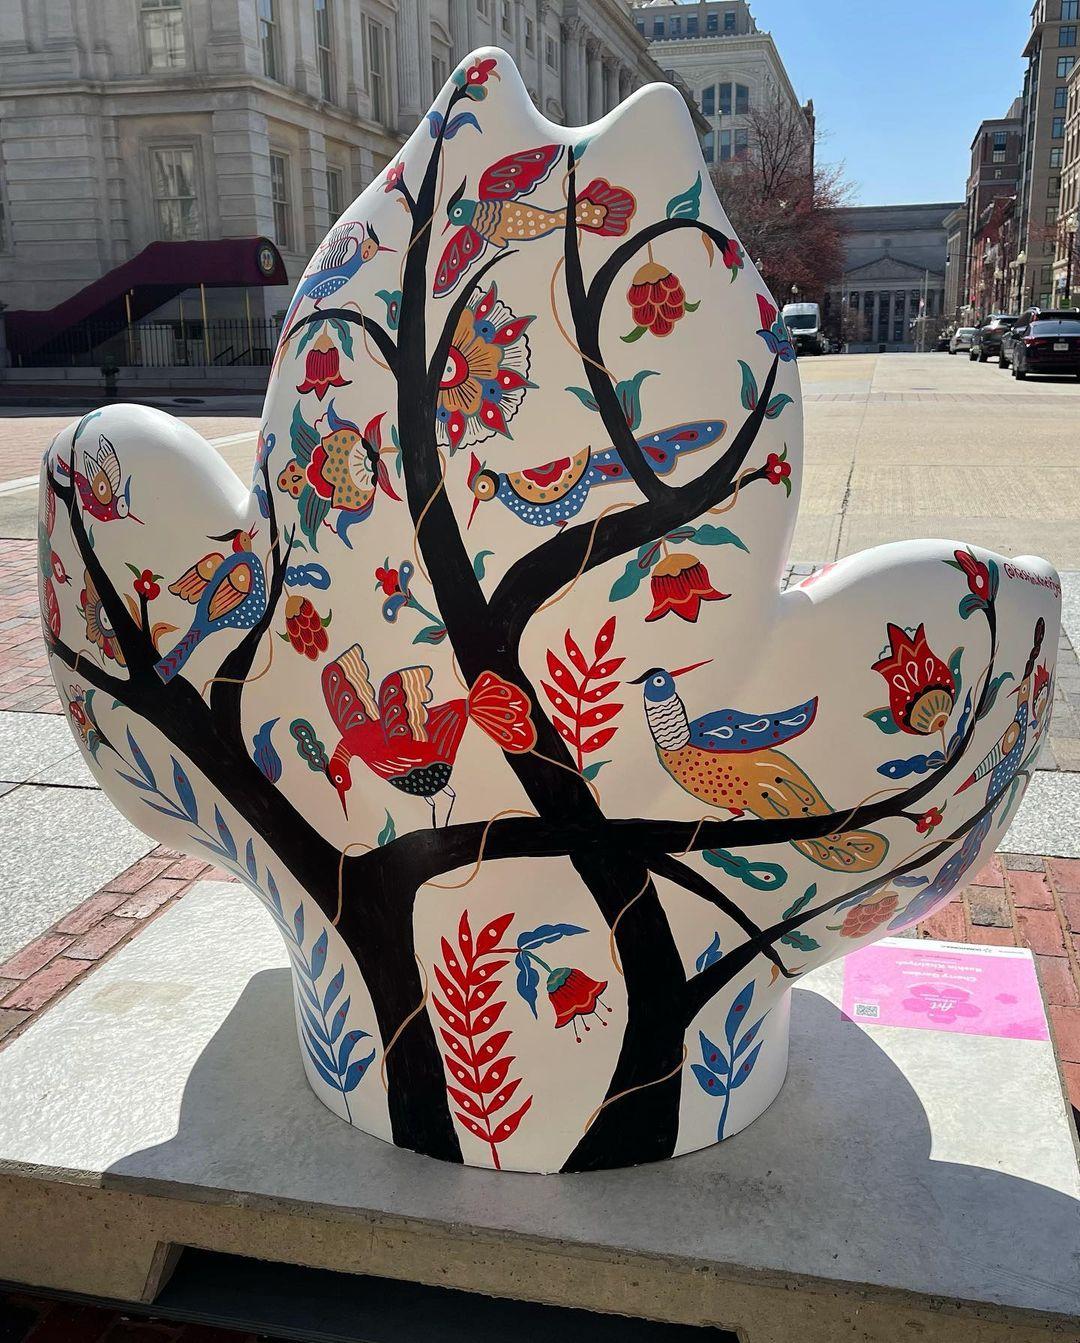 Back view of cherry blossom sculpture with trees and birds.